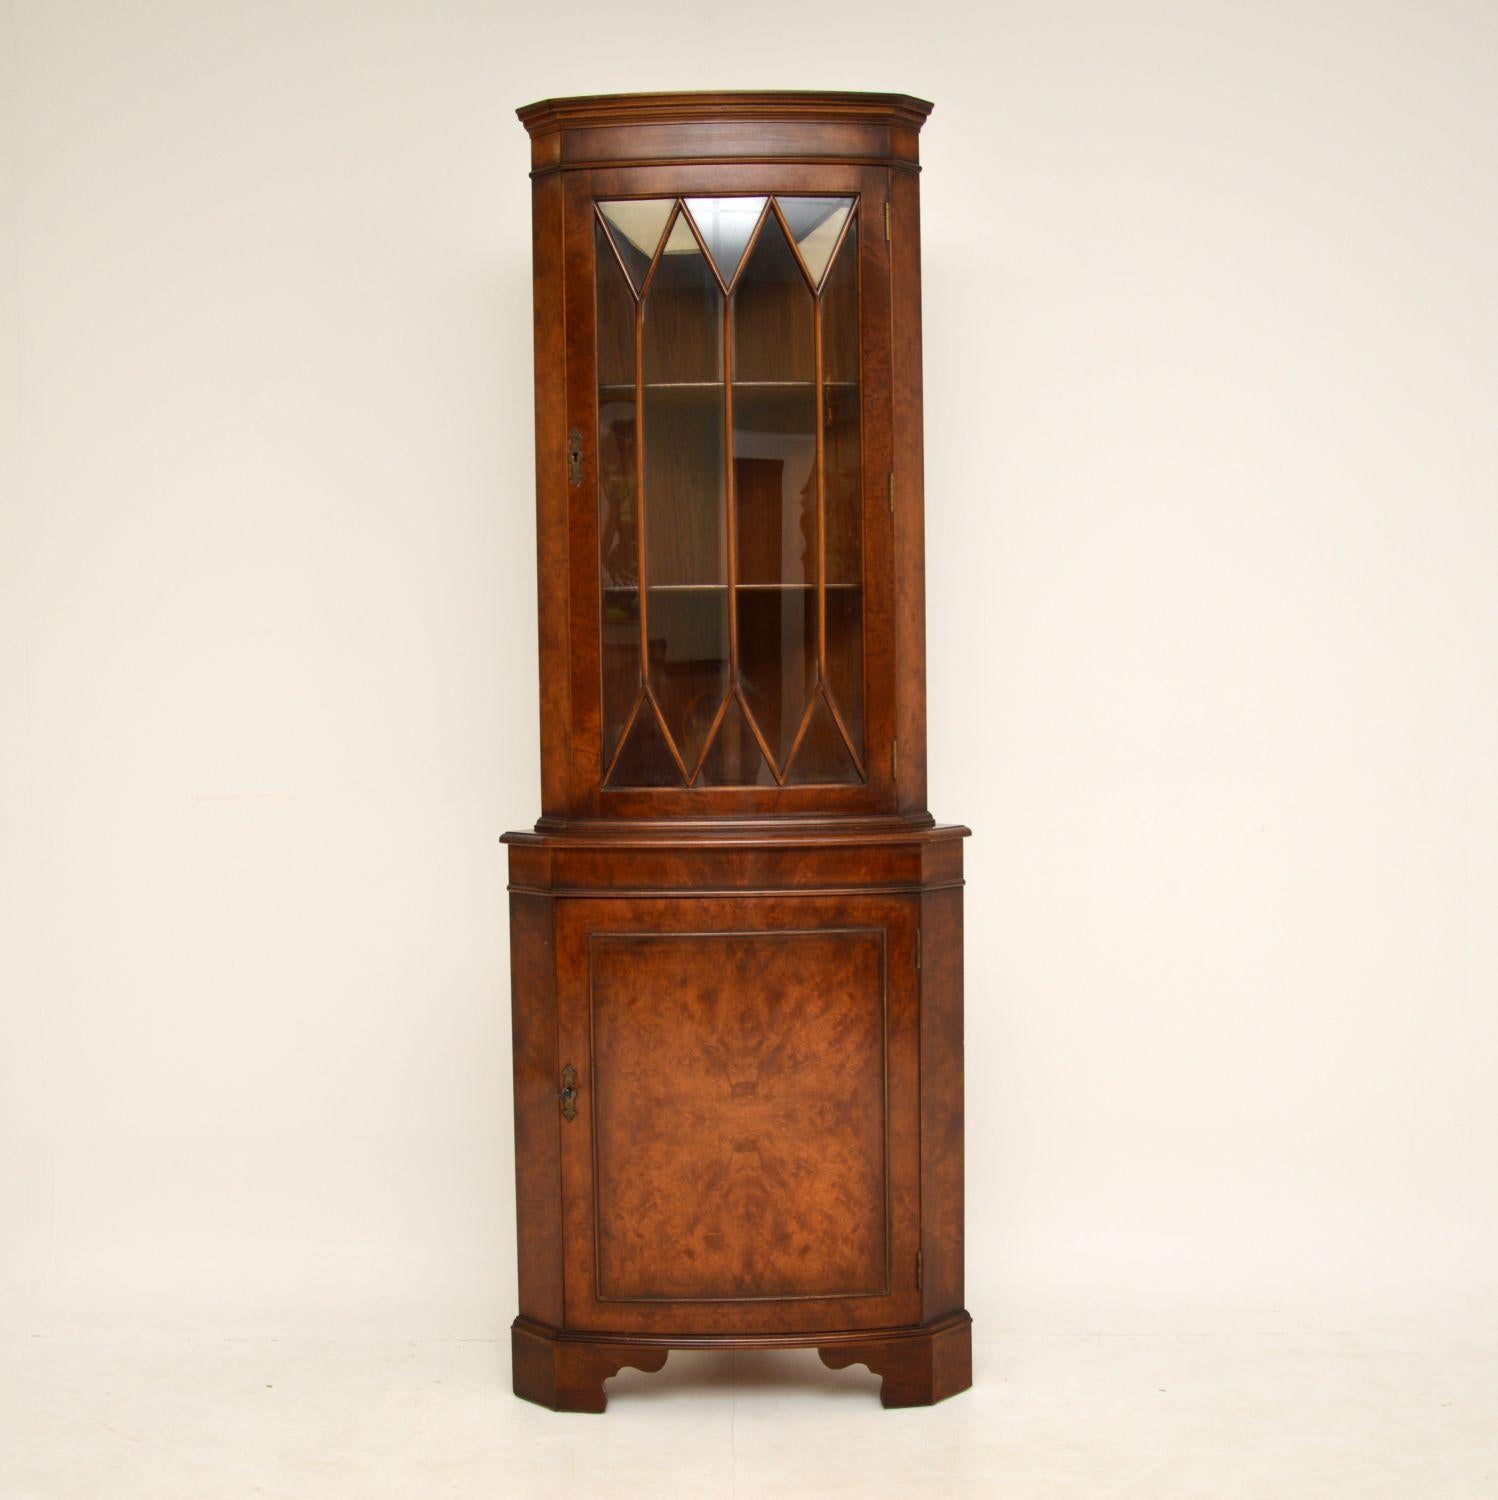 A smart and useful walnut corner cabinet in the antique Georgian style. this dates from around the 1950’s period.

It is of lovely quality, with a lovely colour and gorgeous burr walnut grain patterns. This sits on bracket feet, and has an astral